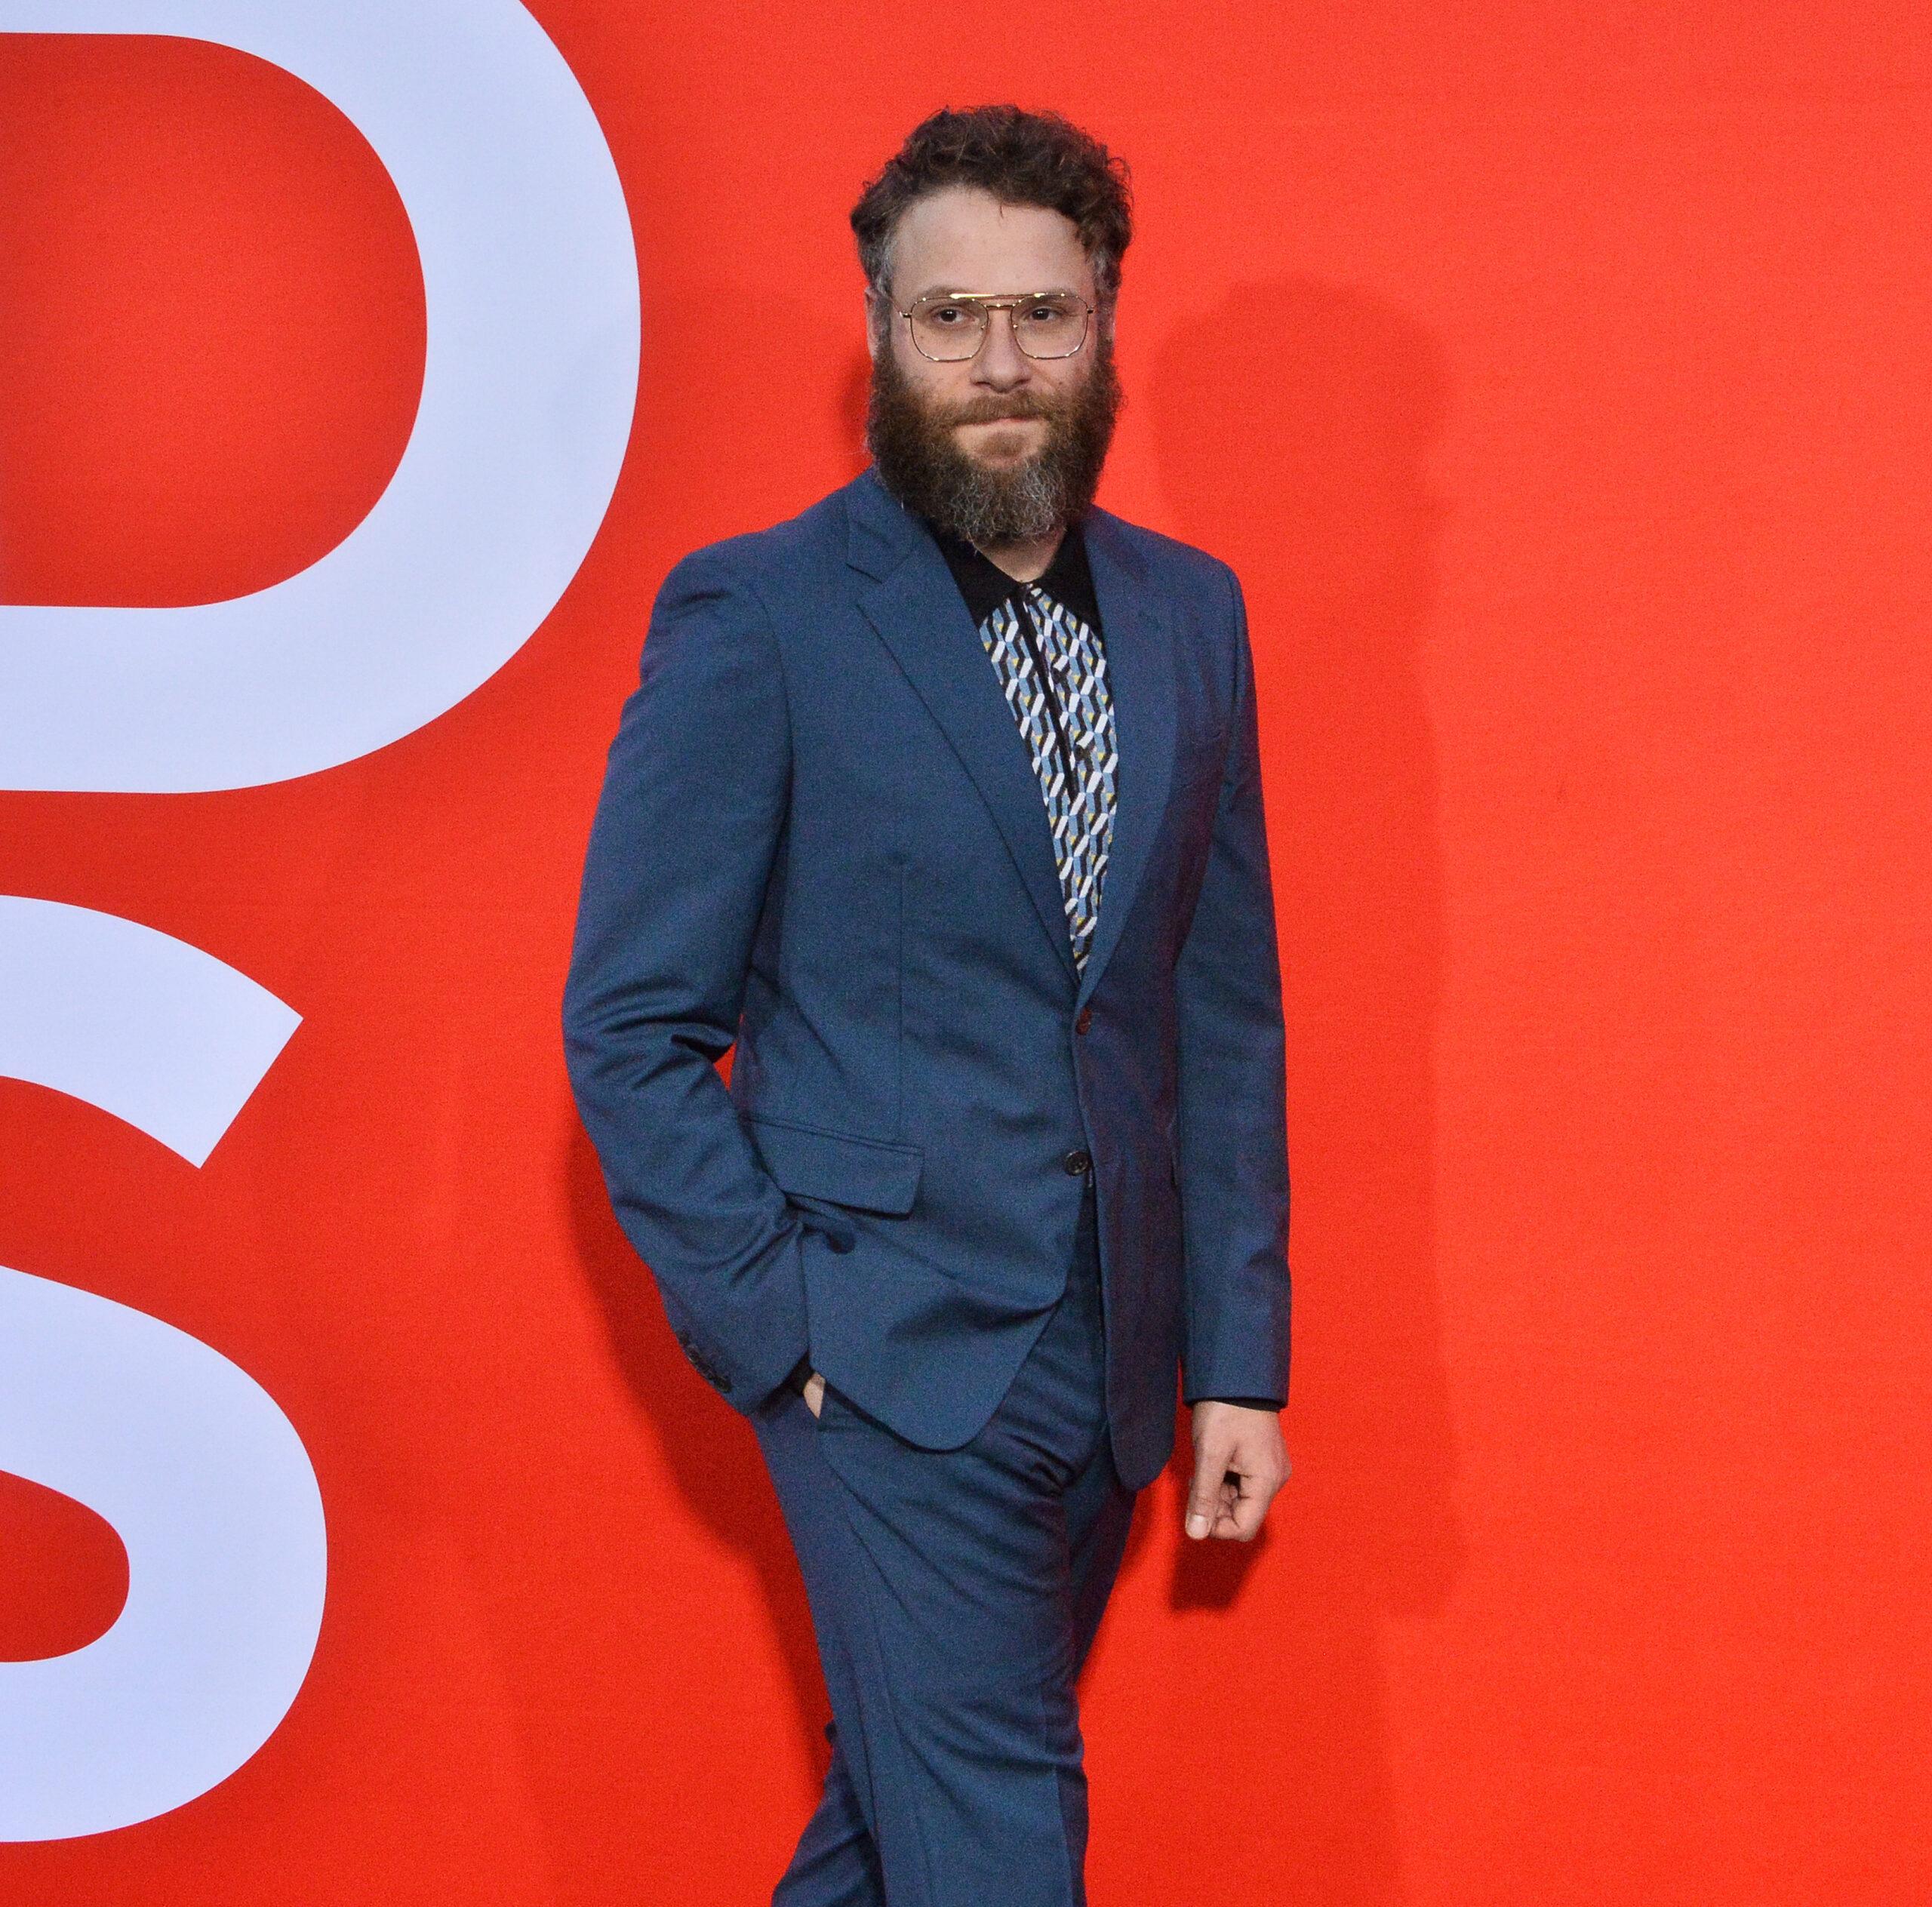 Seth Rogen attends the "Good Boys" premiere in Los Angeles